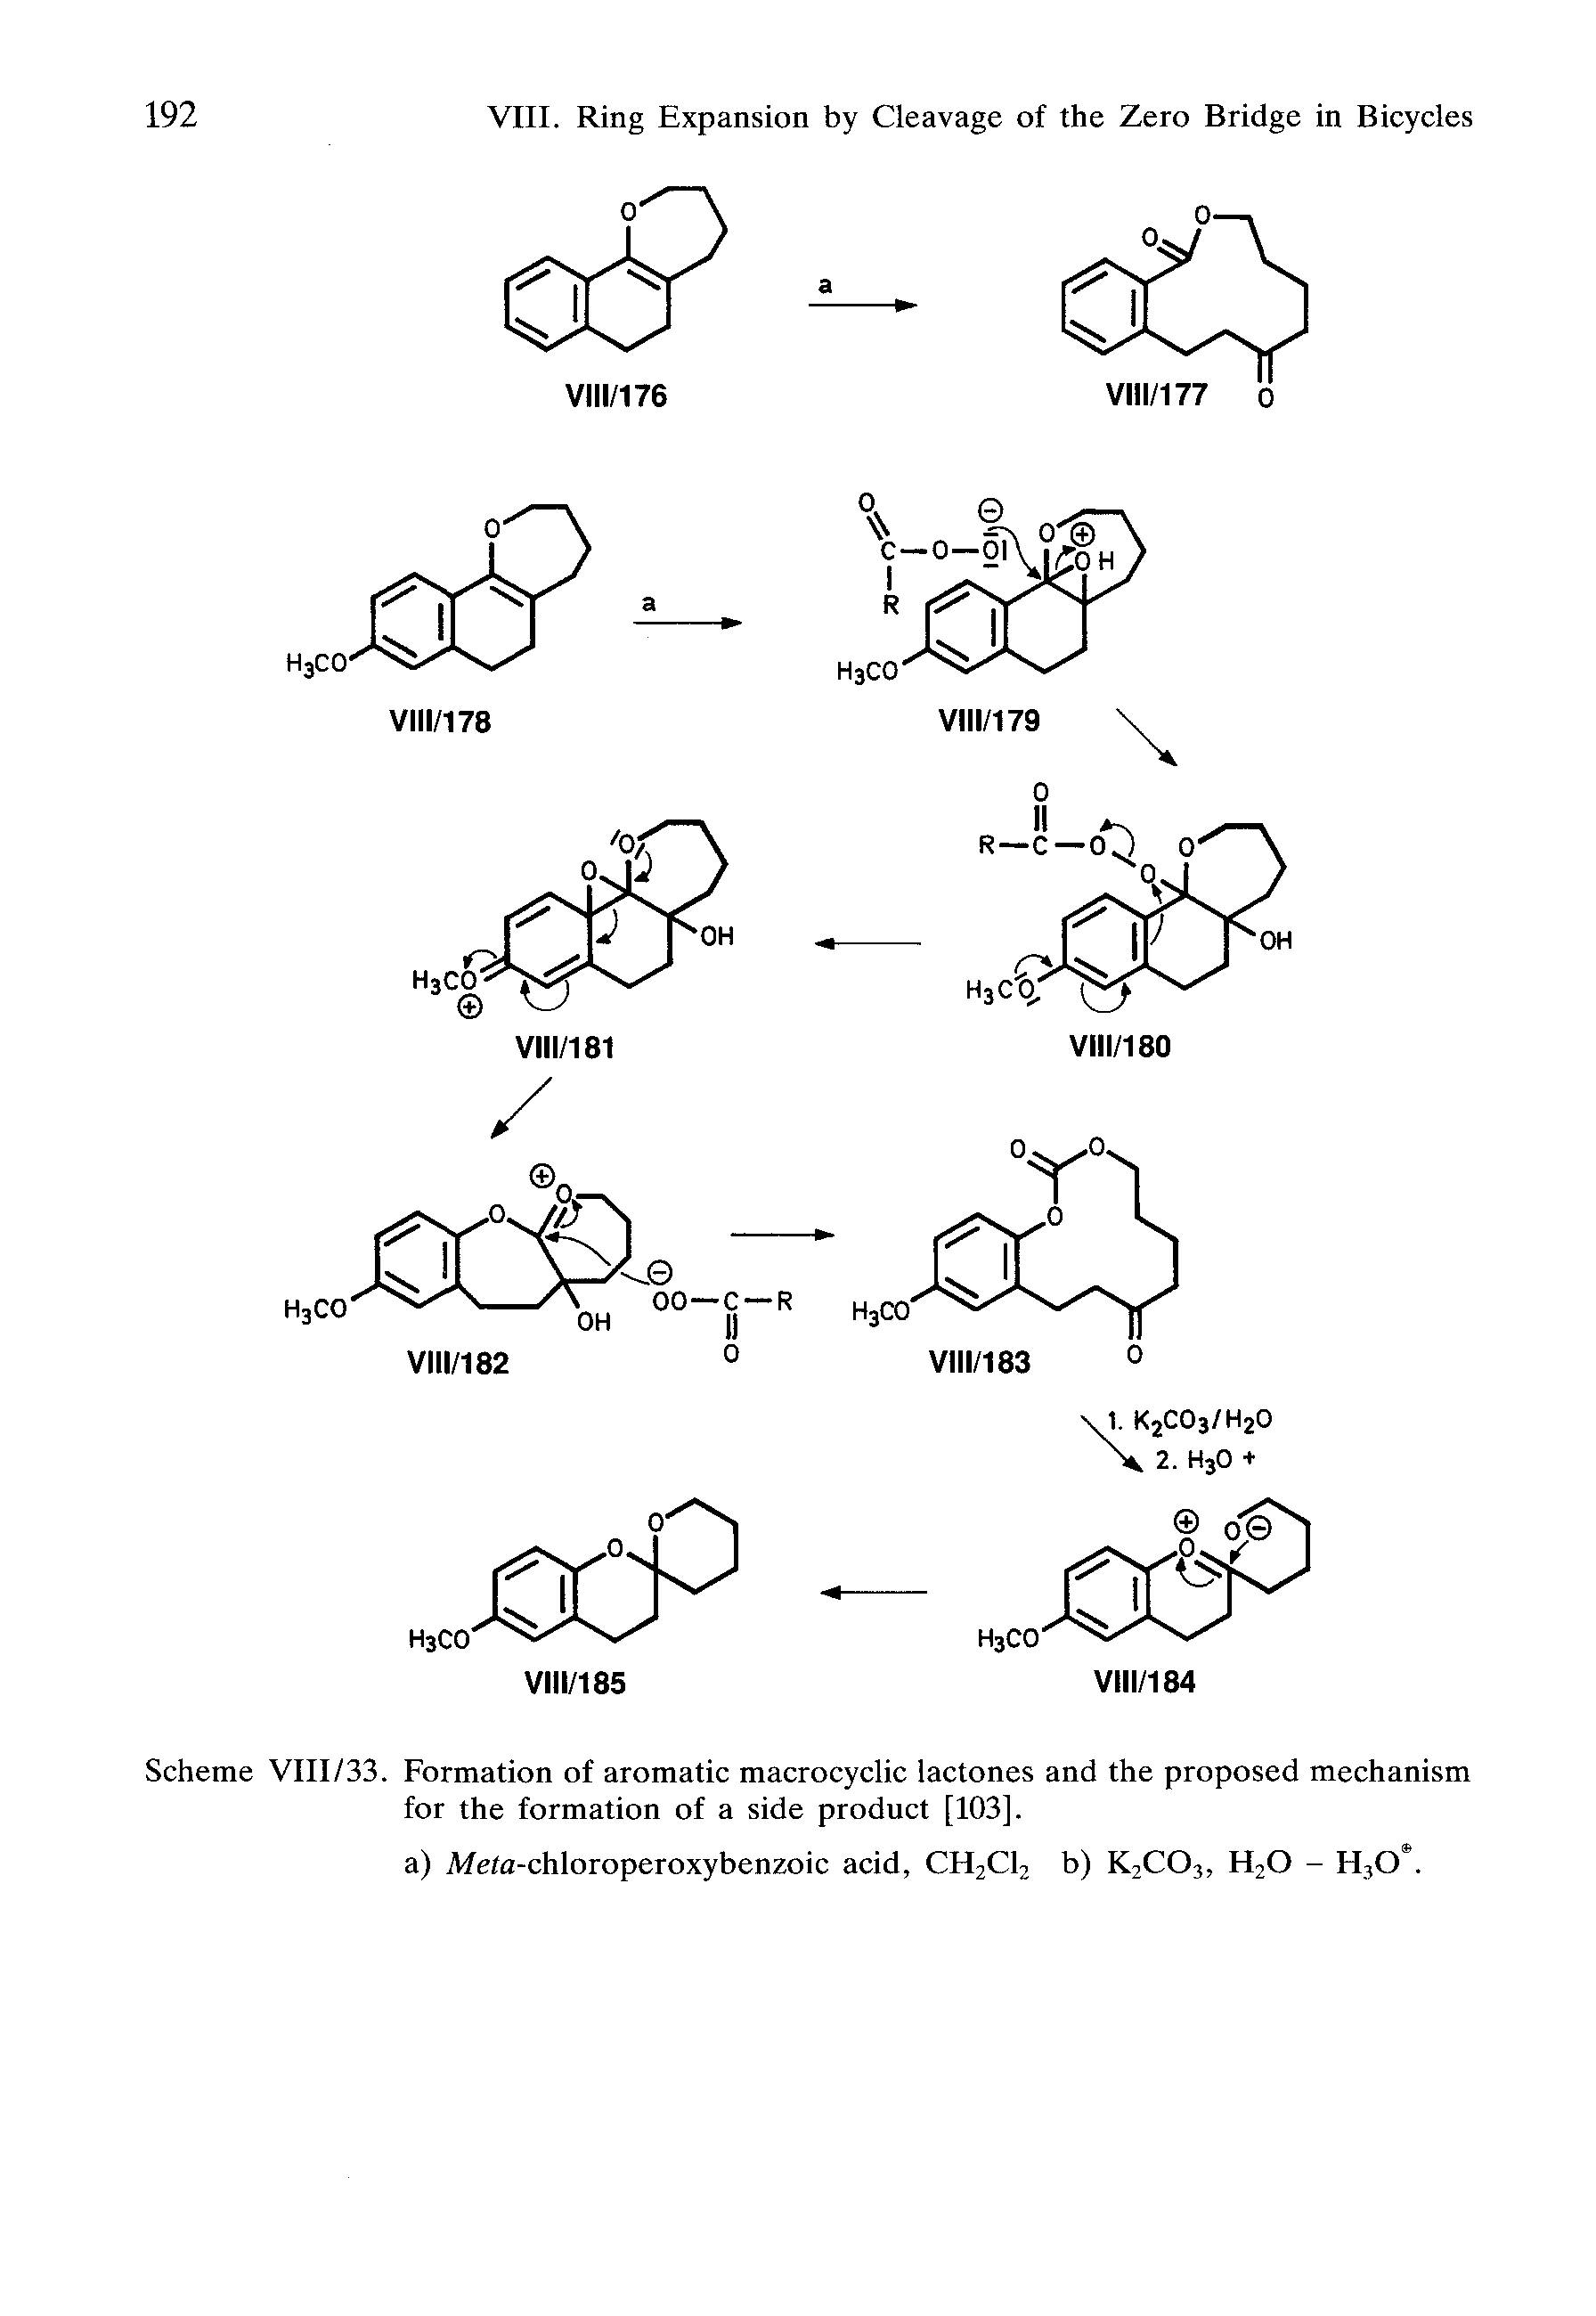 Scheme VIII/33. Formation of aromatic macrocyclic lactones and the proposed mechanism for the formation of a side product [103].